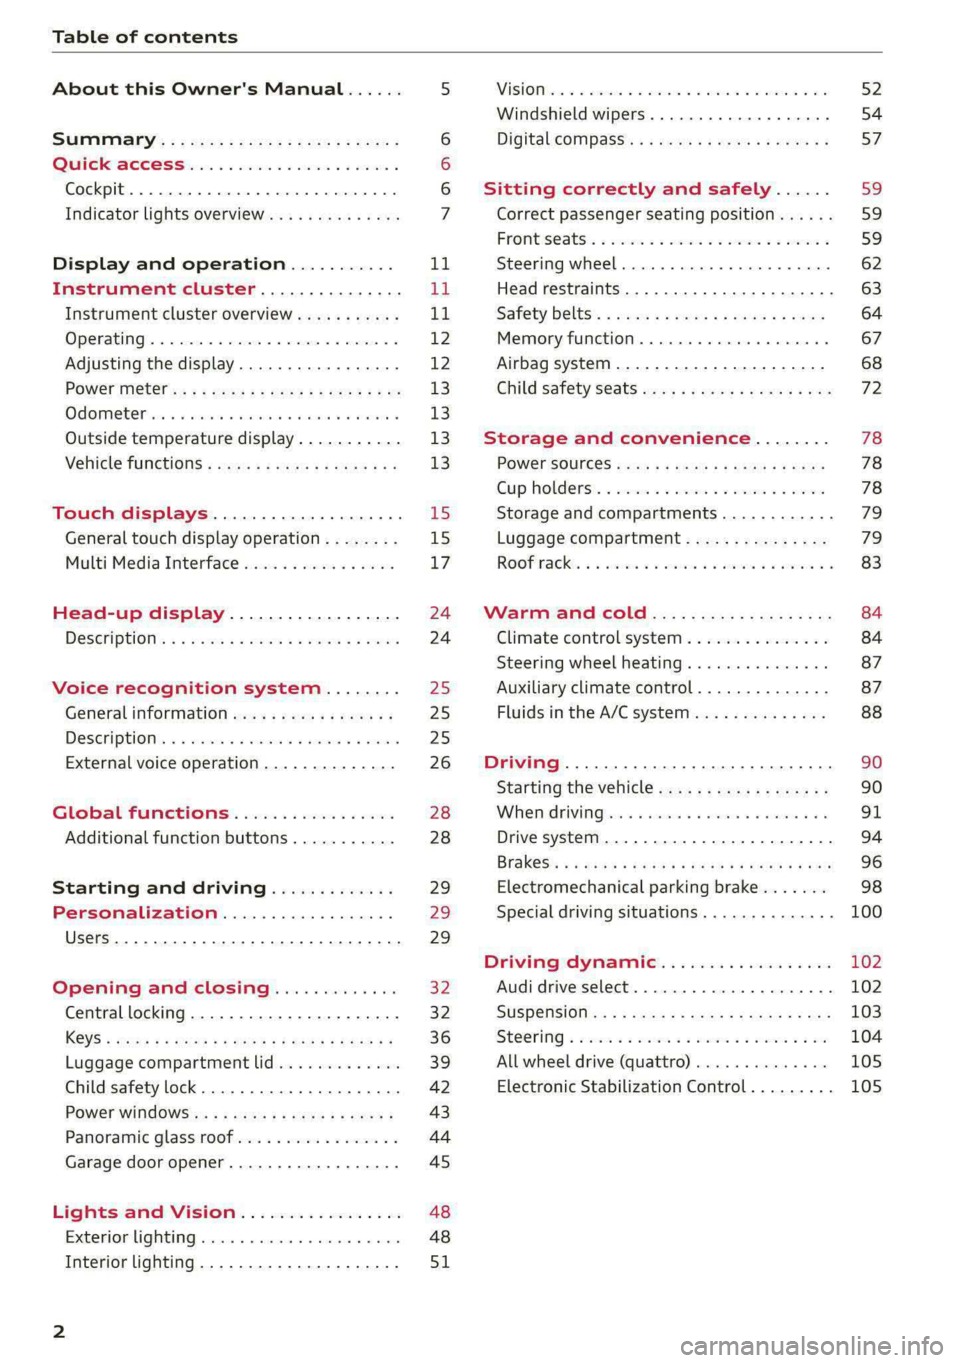 AUDI E-TRON 2021  Owners Manual Table of contents 
  
About this Owner's Manual...... 
SUMIMAry: < = exe : eens: Seen cs sens 
QutckeaeCe ssh: «i esis se ois a eaves @ 
Cockpit. ...... 0... eee eee eee  eee 
Indicator lights ov